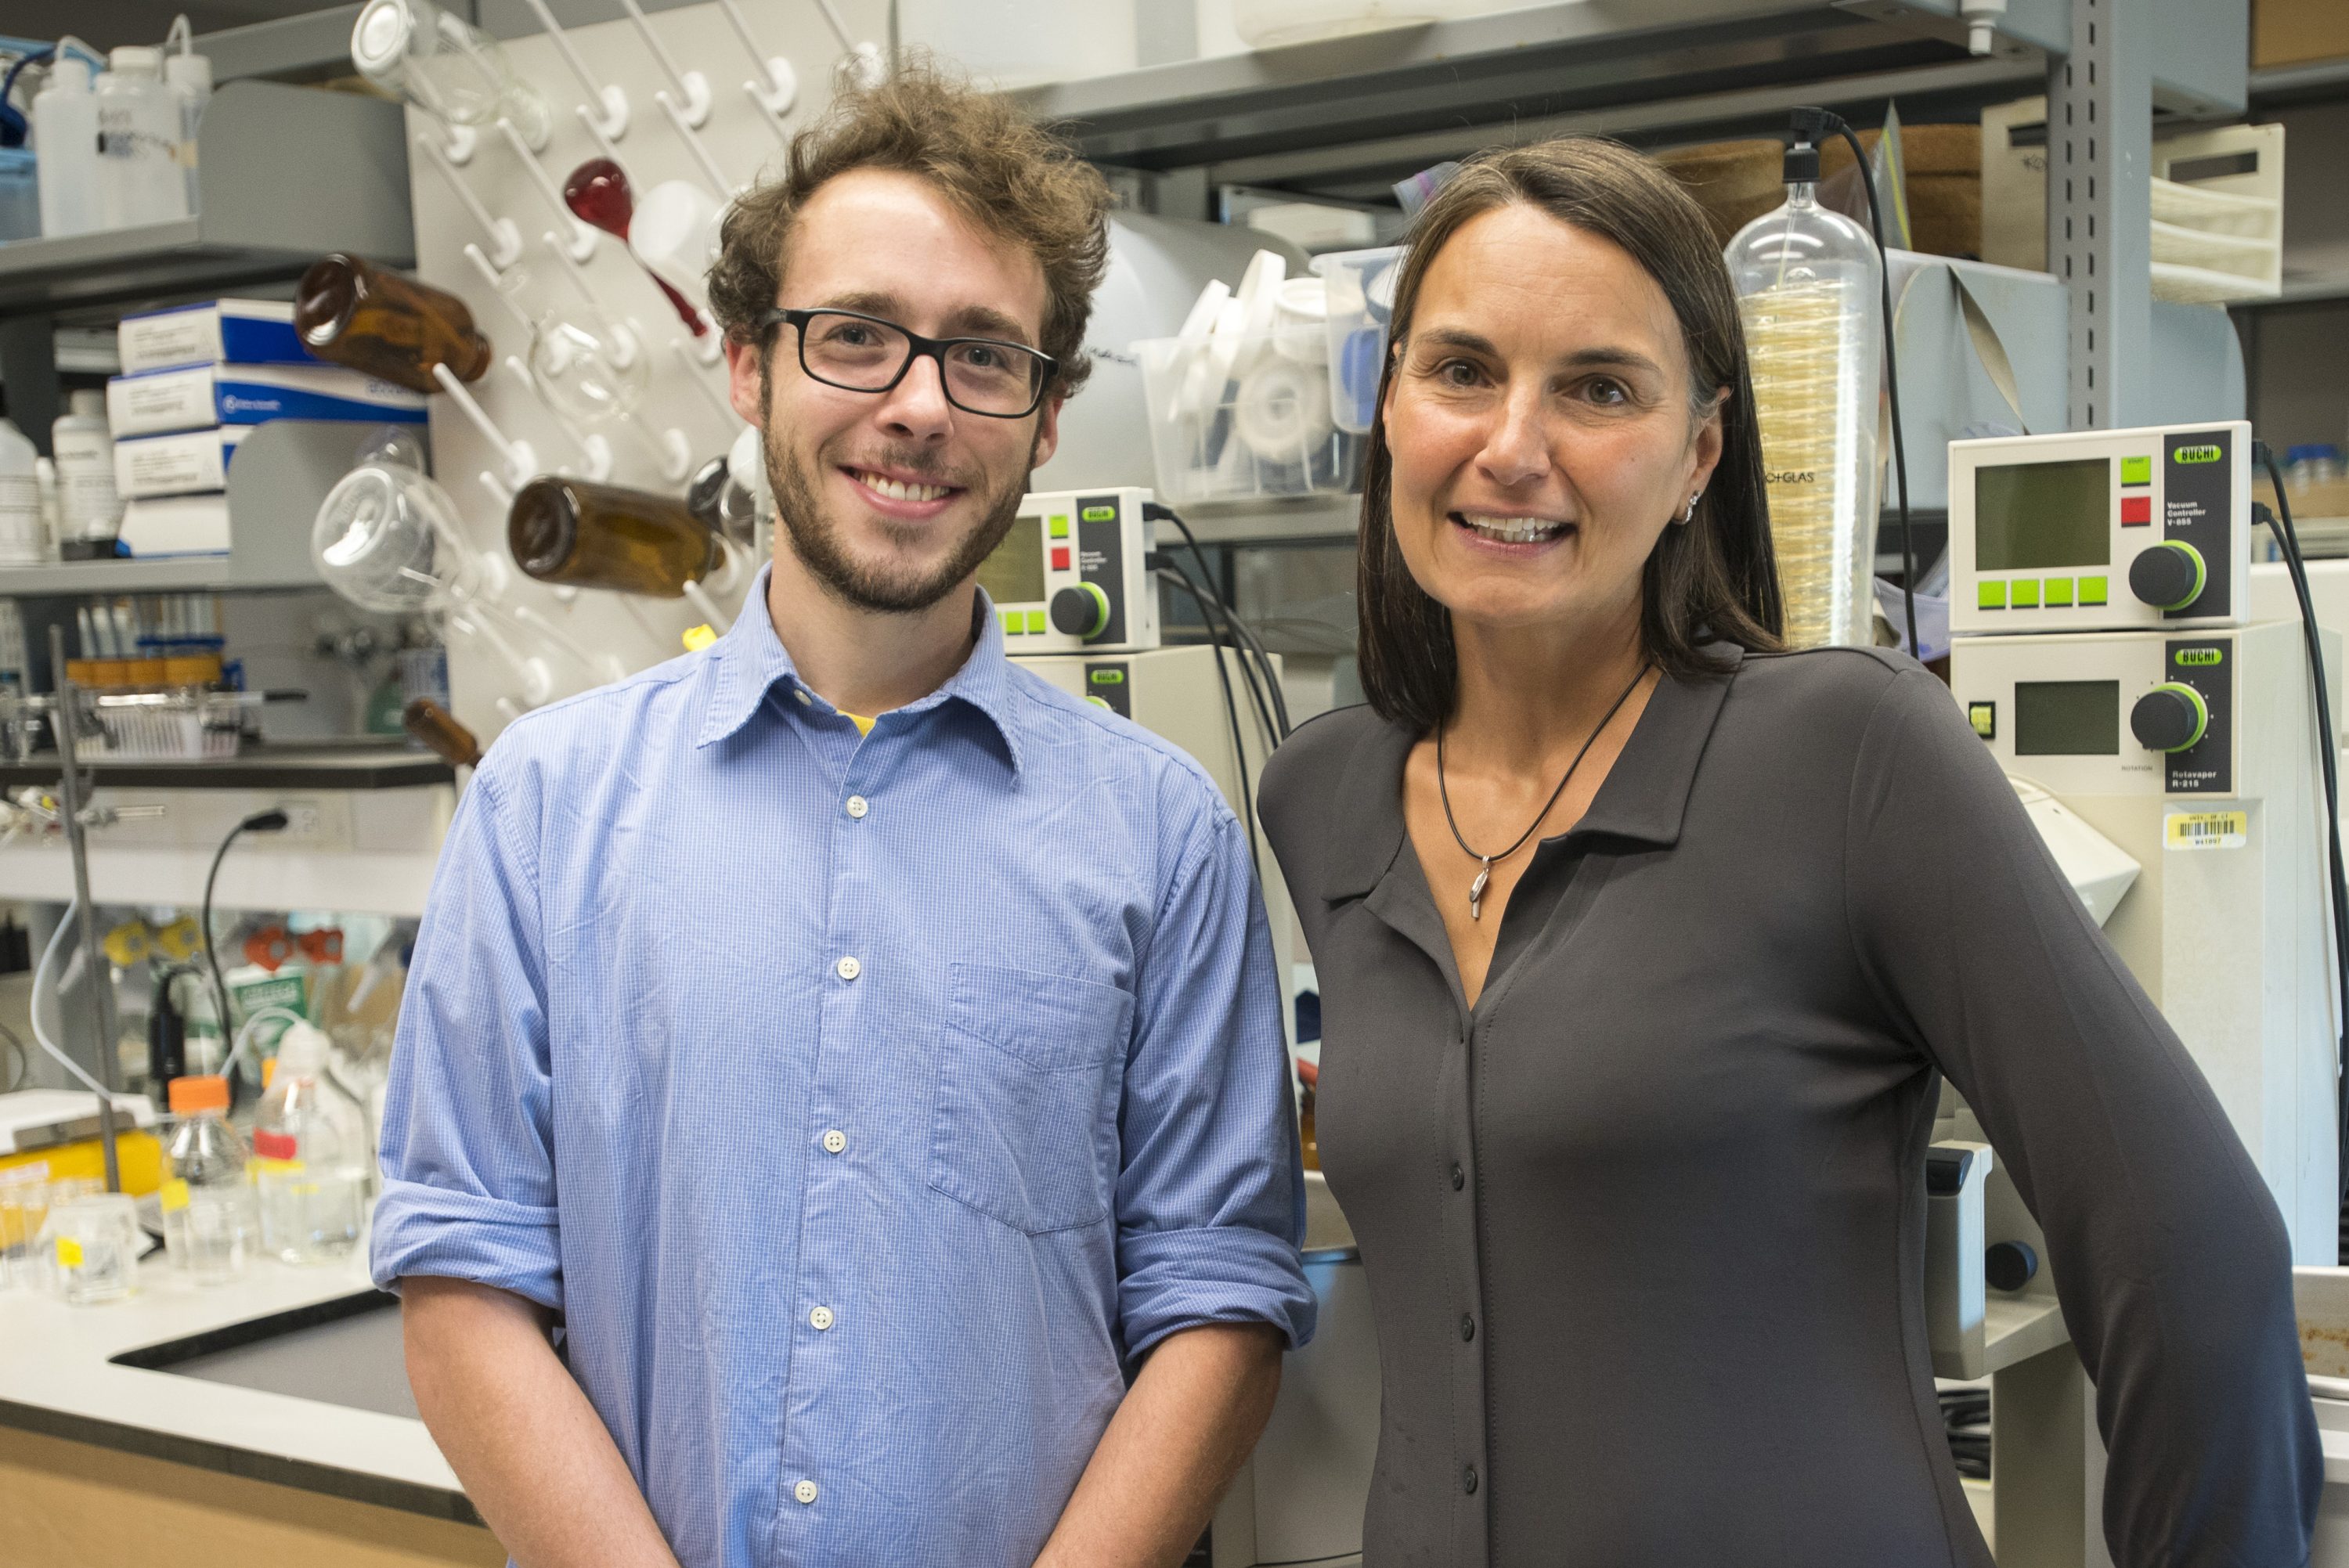 Professor Penny Vlahos, and graduate assistant Joe Warren recipients of a grant from the University’s new National Science Foundation Innovation Corps Site, Accelerate UConn on Aug. 18, 2016. (Sean Flynn/UConn Photo)